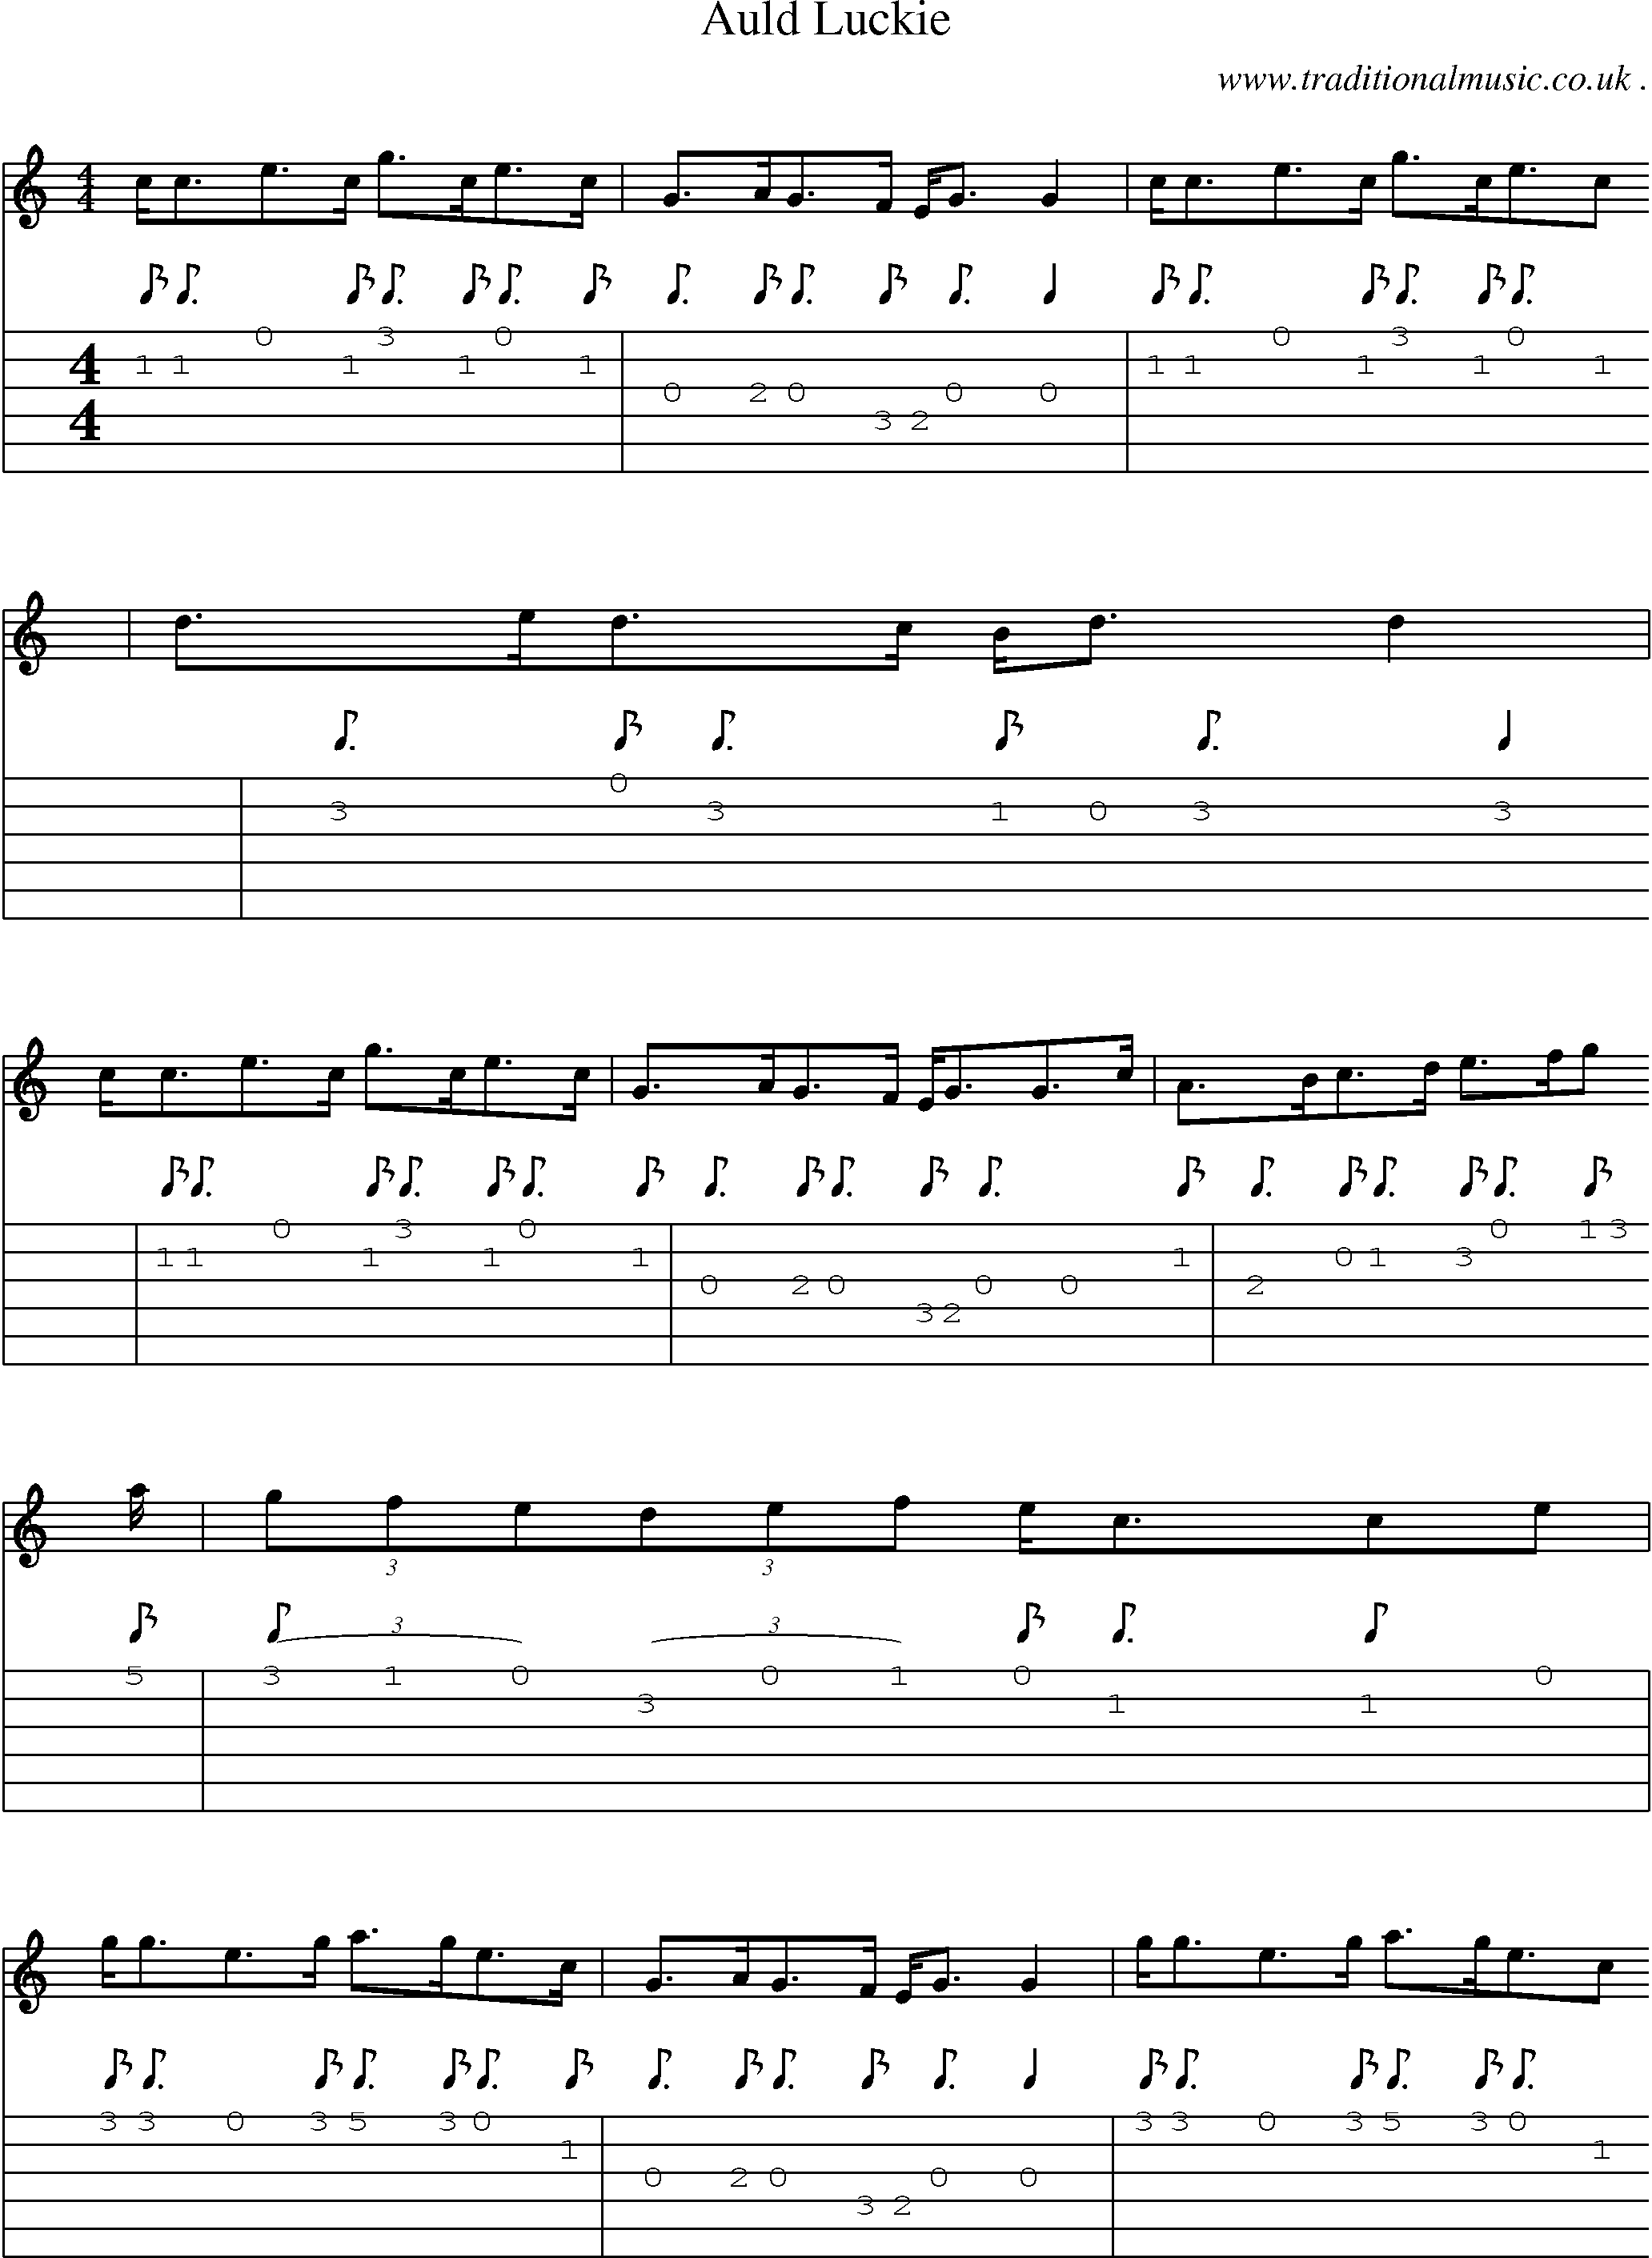 Sheet-Music and Guitar Tabs for Auld Luckie